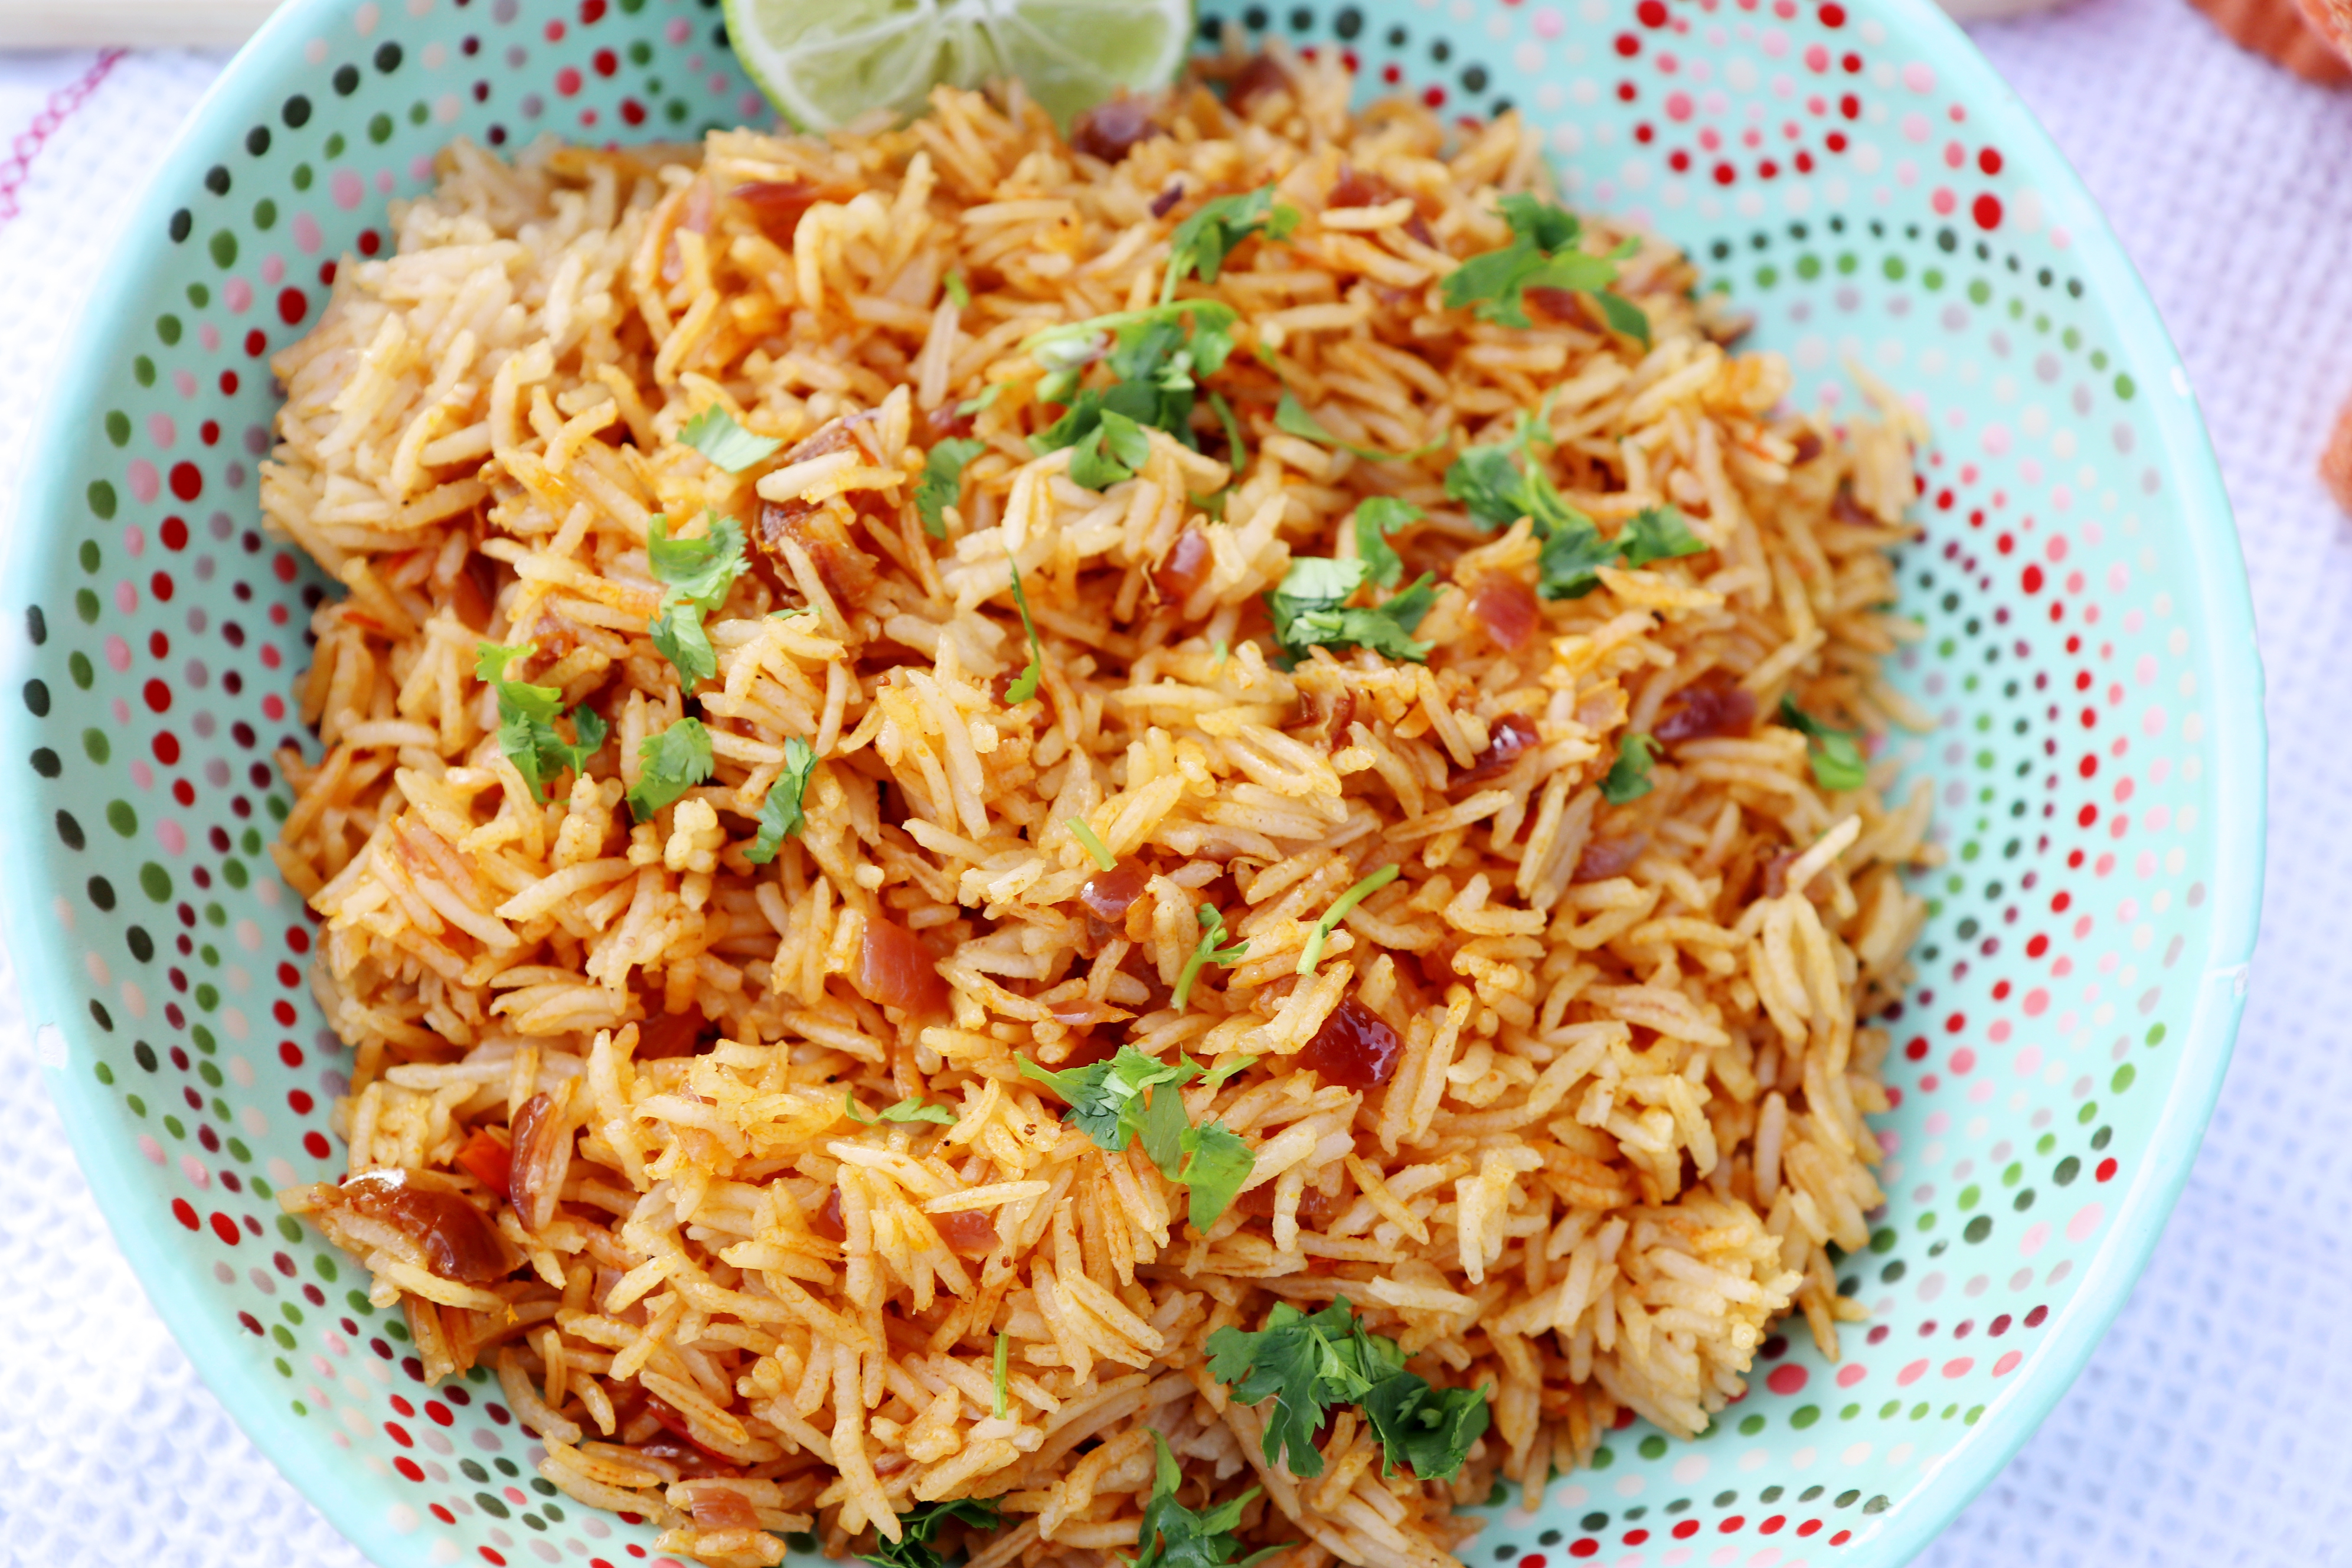 Harissa and orange scented rice with dates